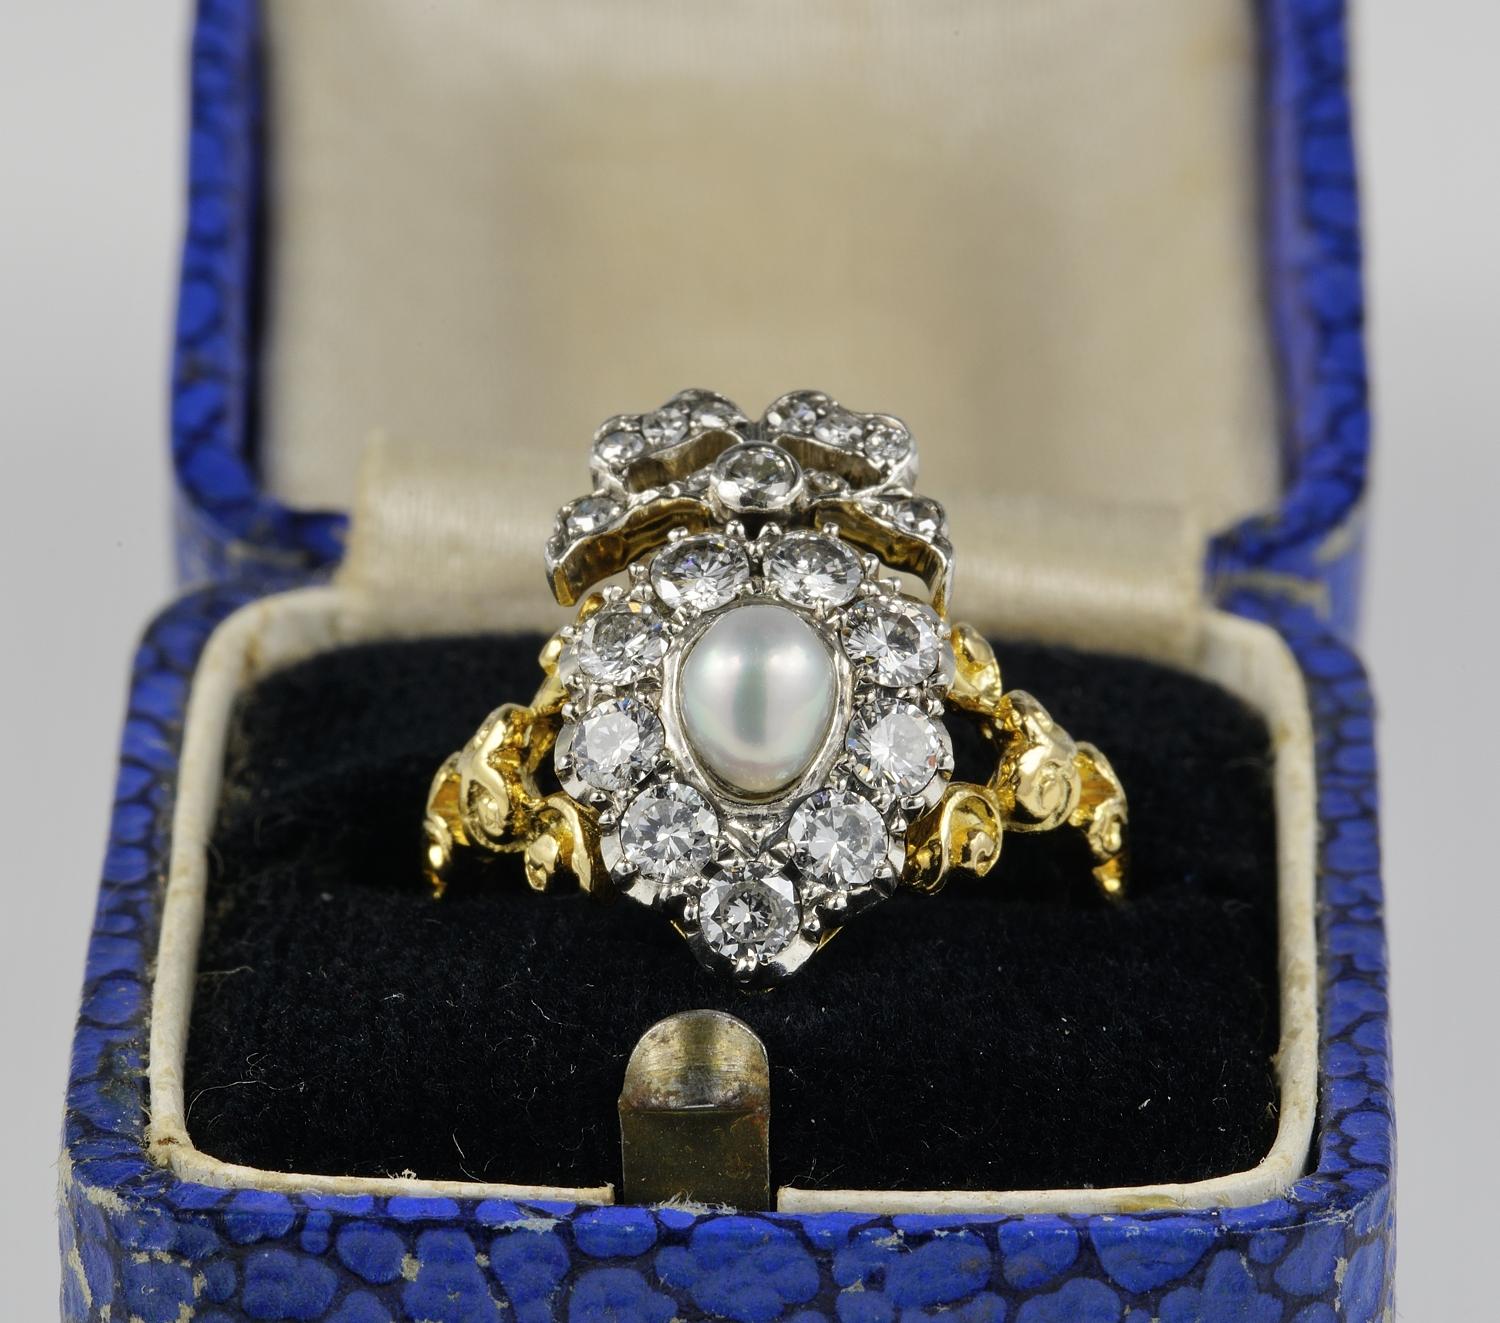 Edwardian Romanticism
This delightful Edwardian period ring is 1910 ca.
Charming Sweet Heart crown adorned with Natural Pearl & Diamonds, topped by a bow, and carving details throughout the mount
Hand crafted of solid 18 KT gold with silver